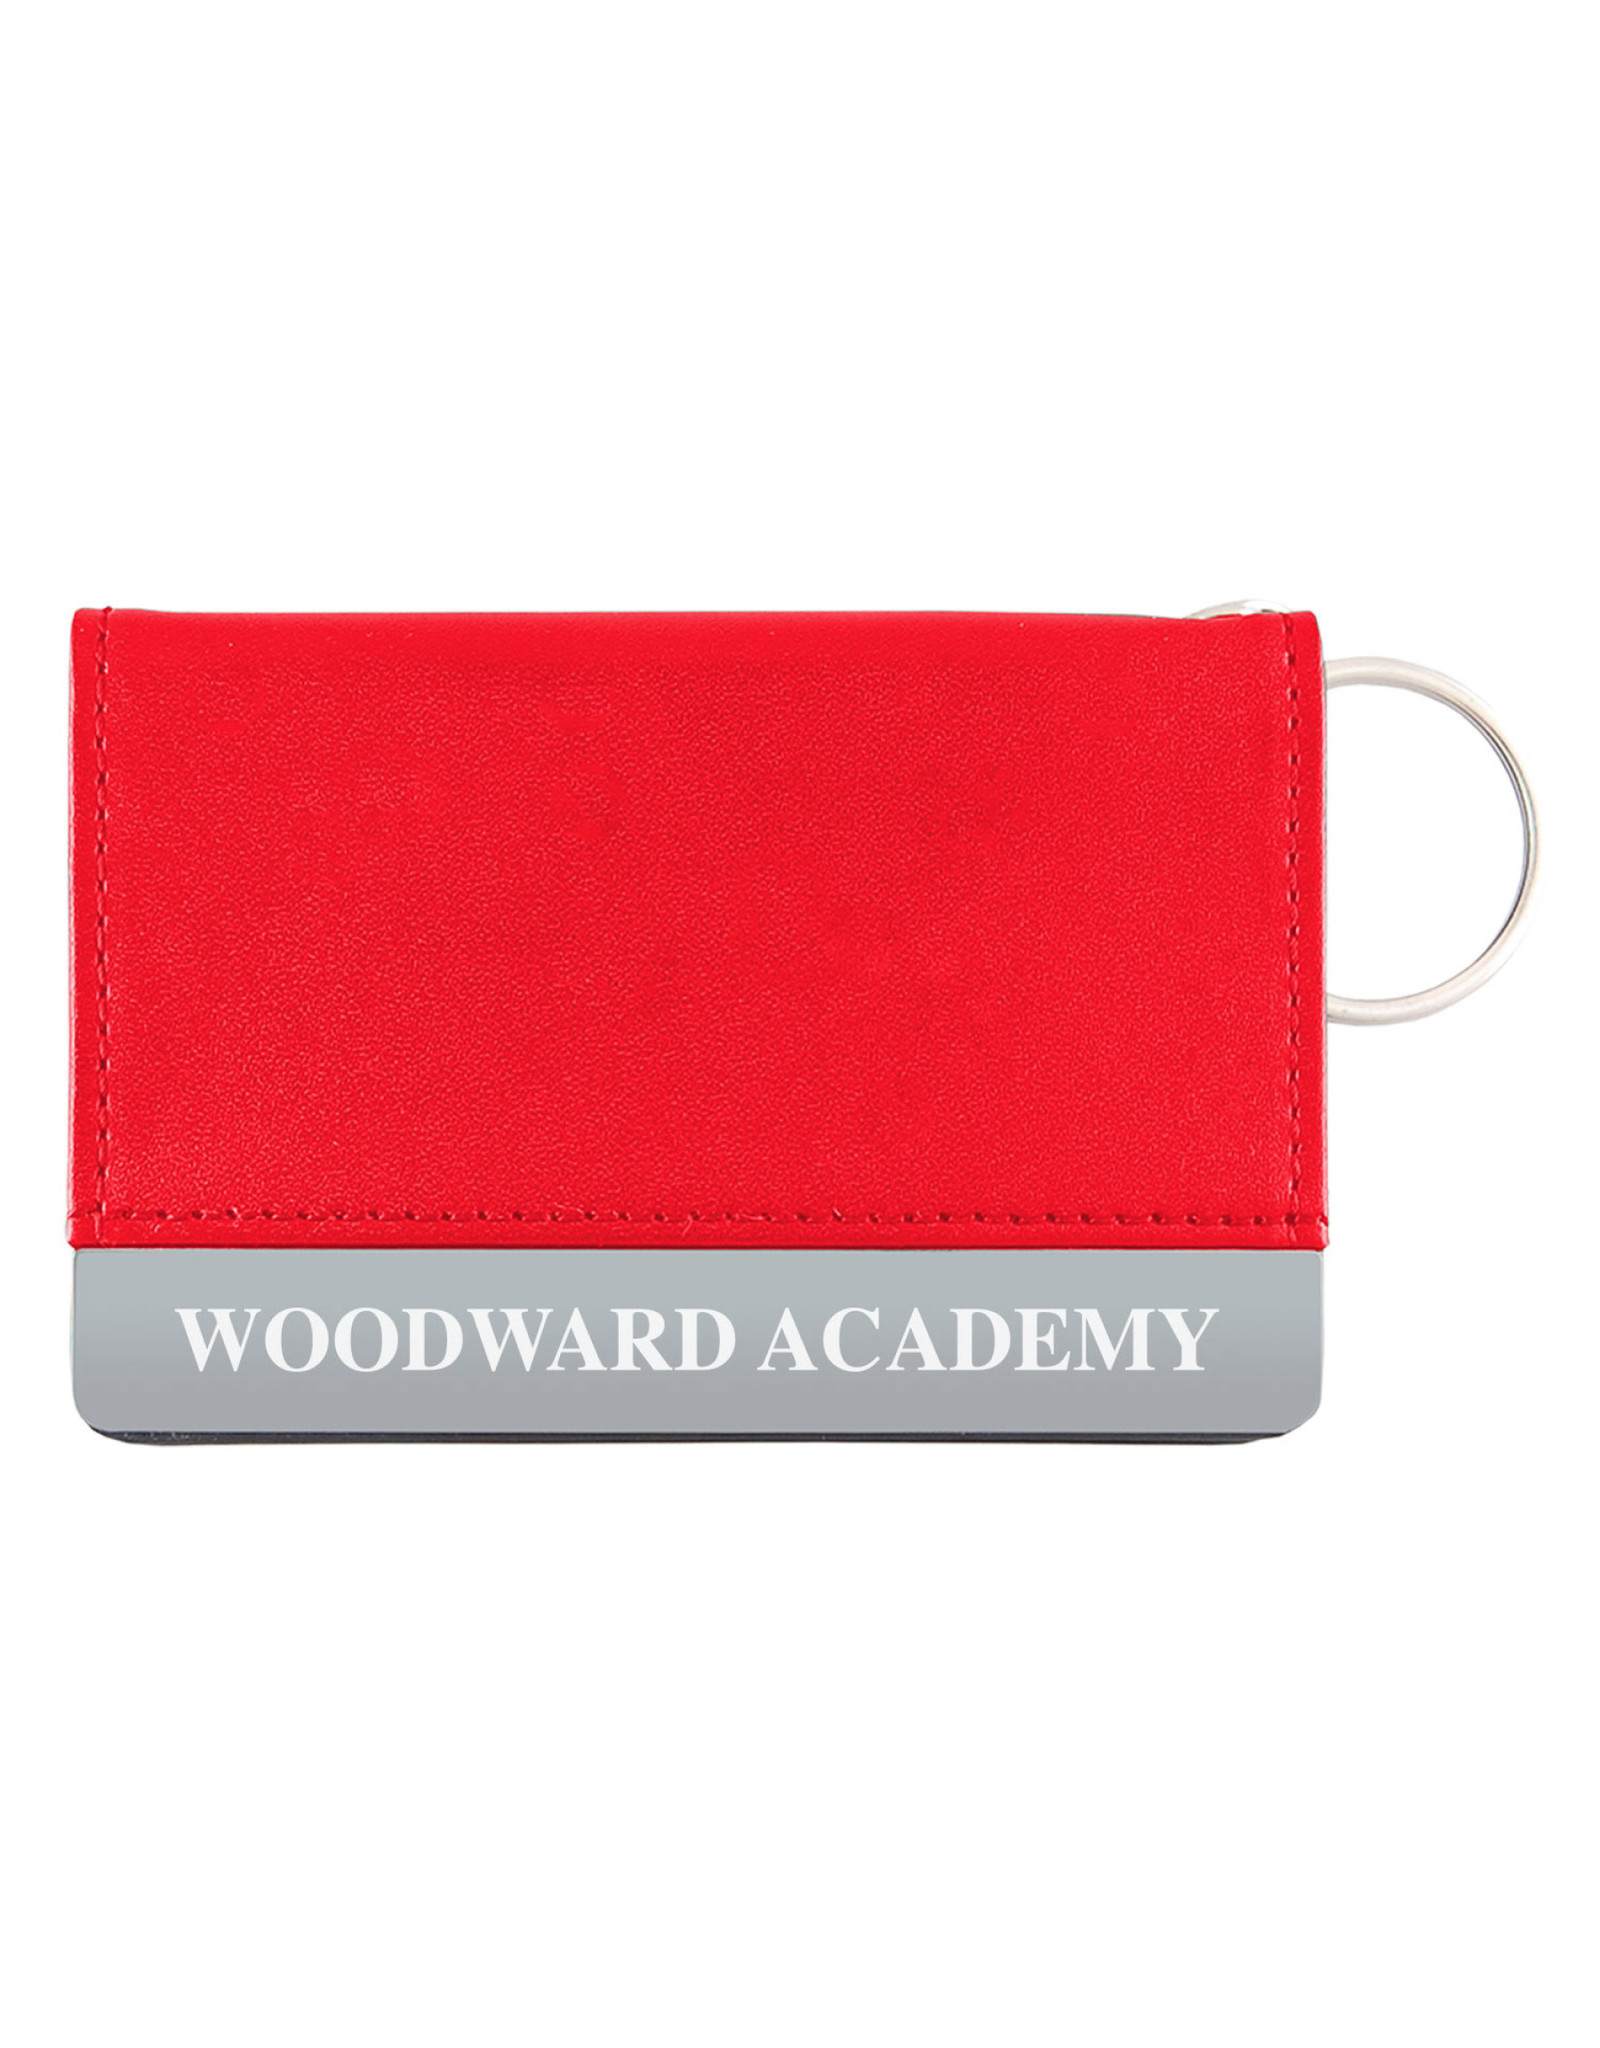 LXG ID Holder in Red by LXG